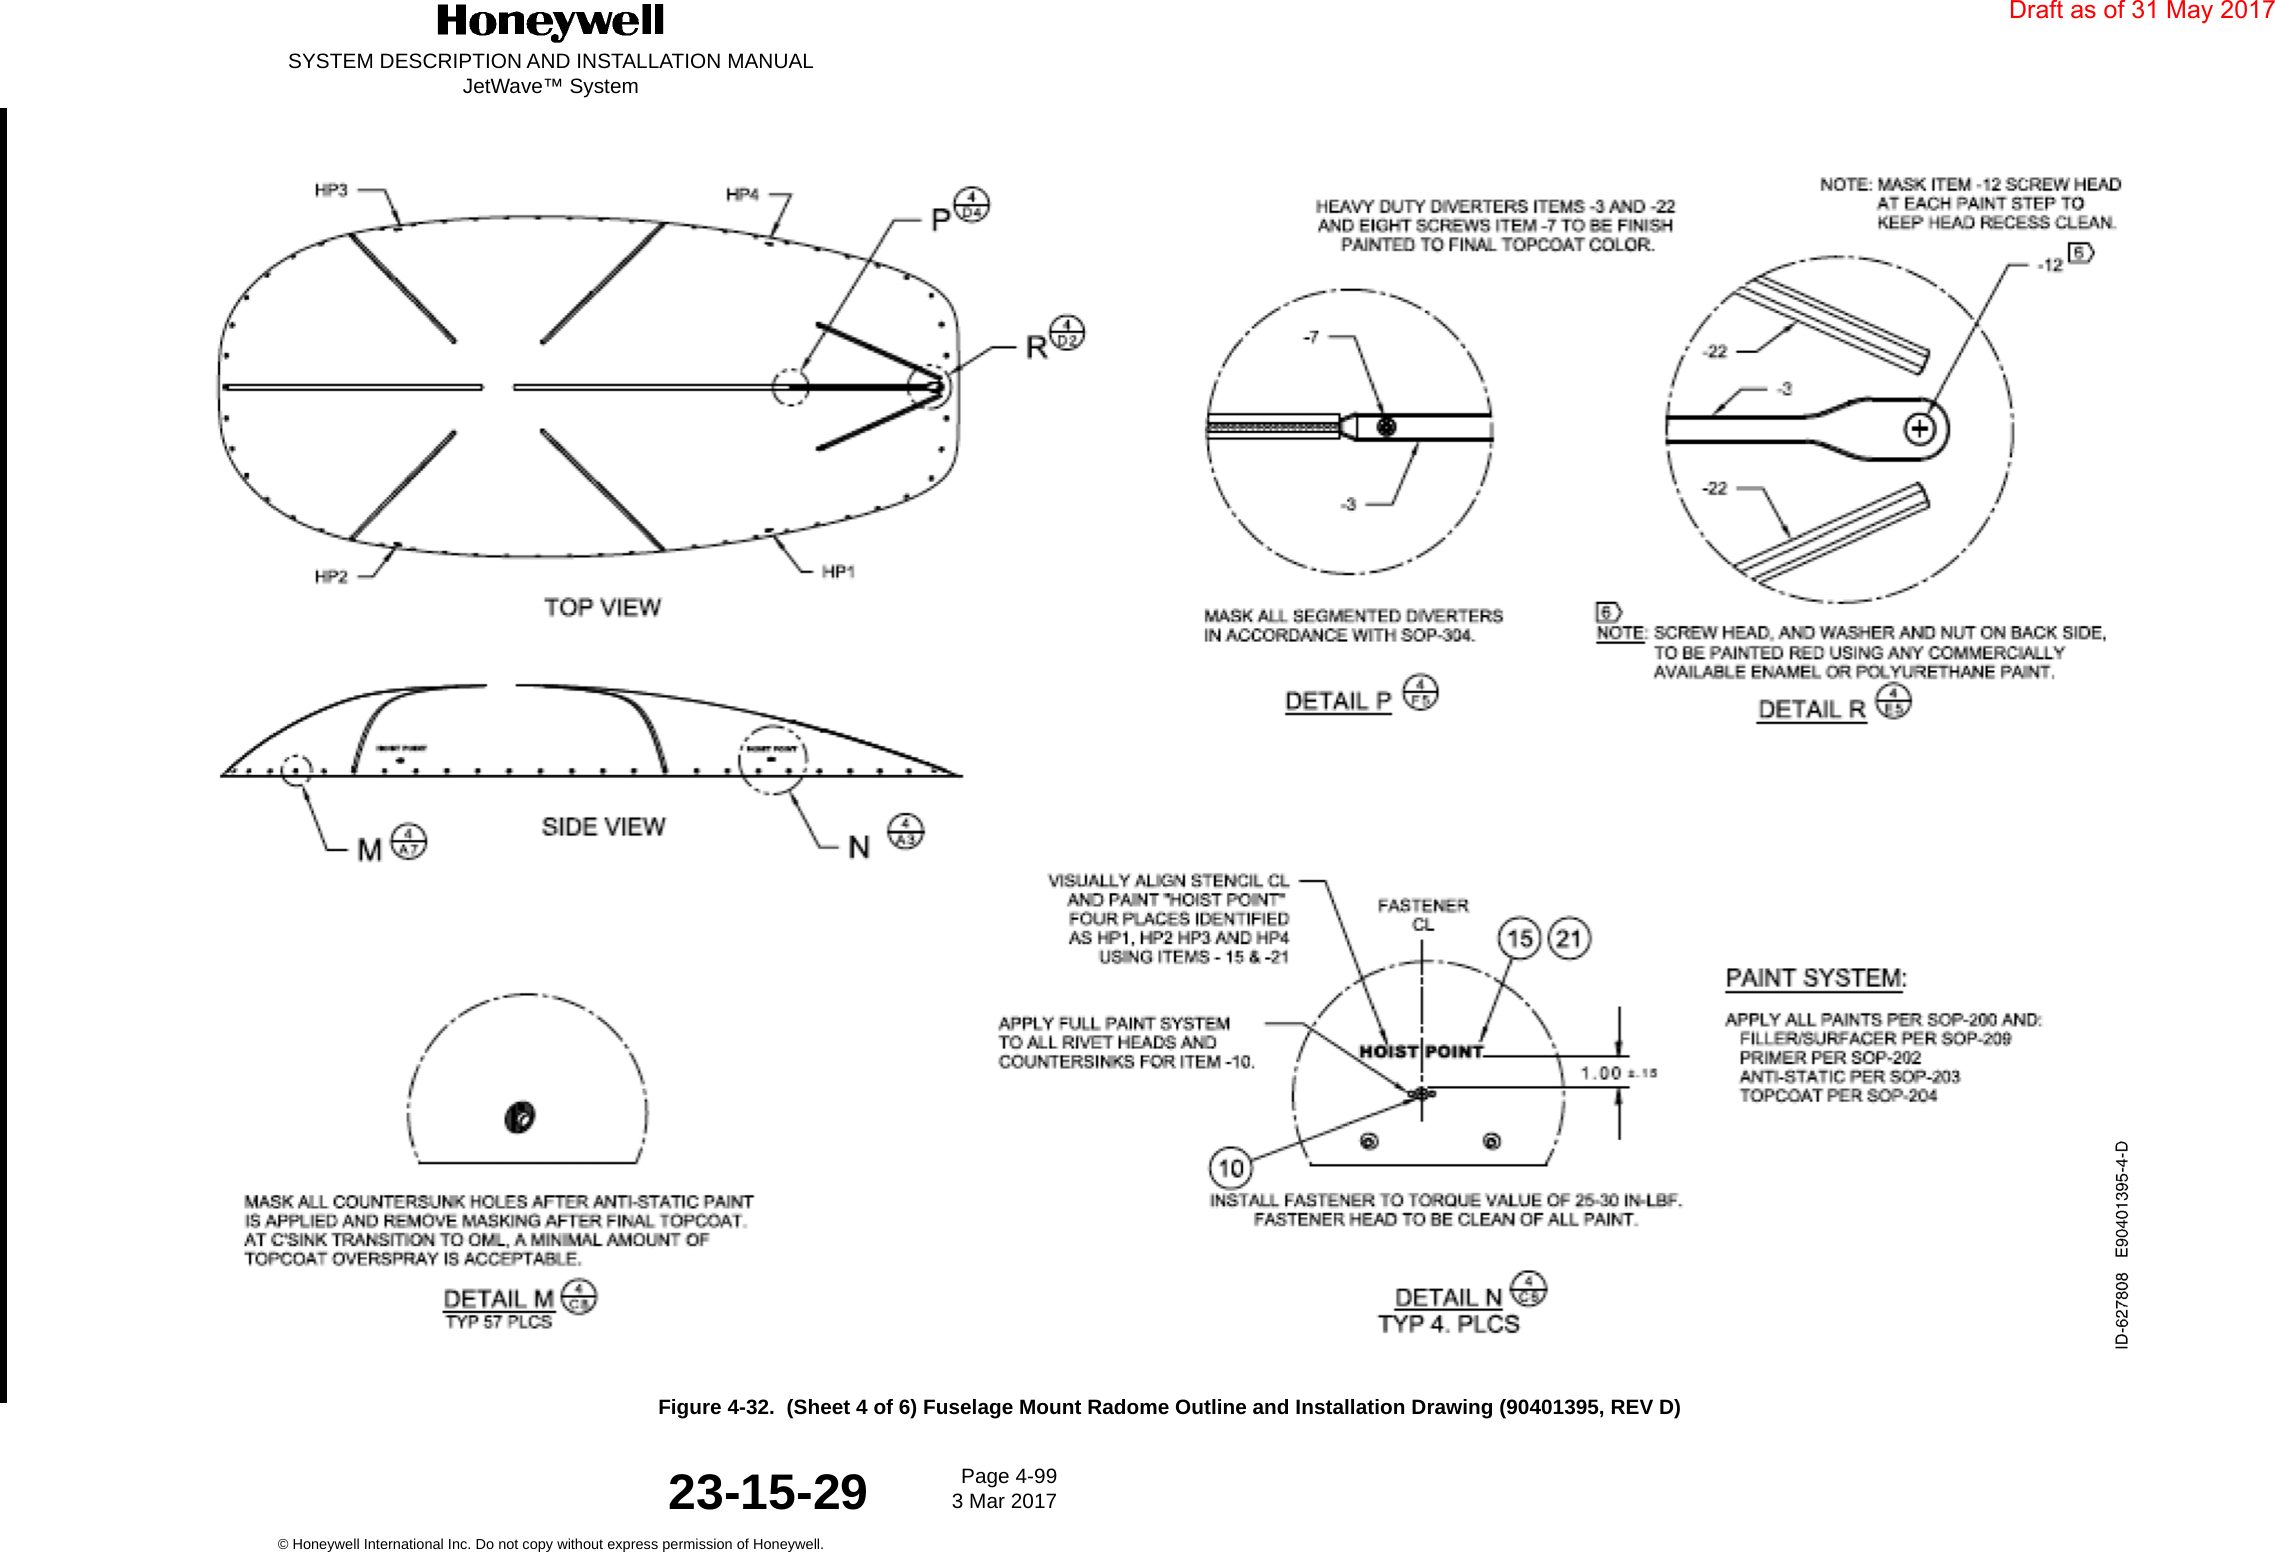 SYSTEM DESCRIPTION AND INSTALLATION MANUALJetWave™ SystemPage 4-99 3 Mar 2017© Honeywell International Inc. Do not copy without express permission of Honeywell.23-15-29Figure 4-32.  (Sheet 4 of 6) Fuselage Mount Radome Outline and Installation Drawing (90401395, REV D)Draft as of 31 May 2017